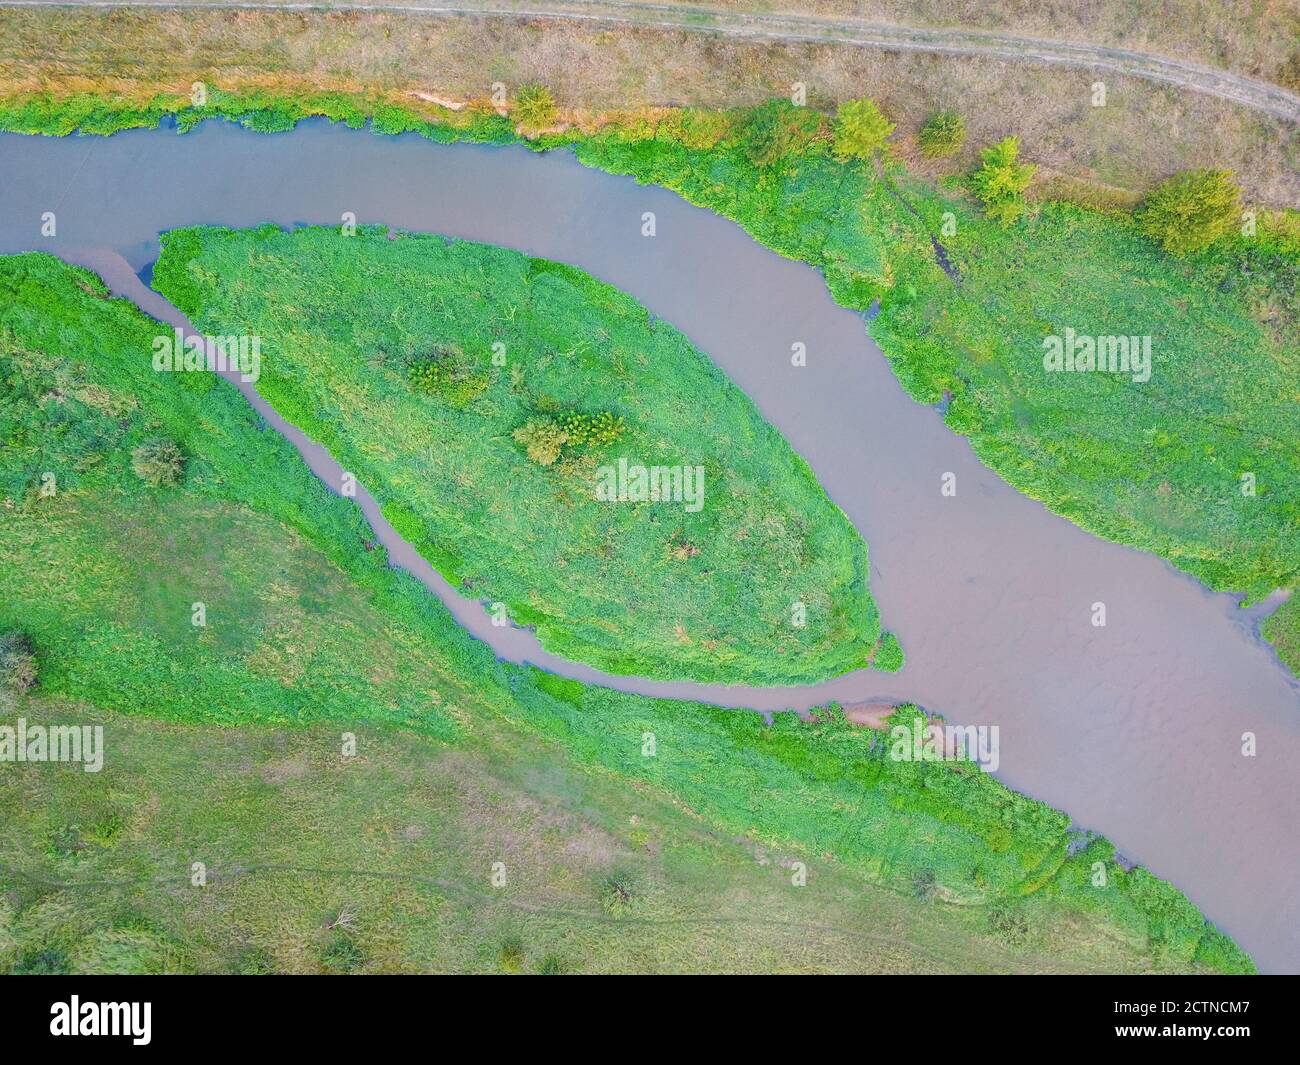 Top down view of small island on a river surrounding by pastures and meadows. Drone, aerial view Stock Photo